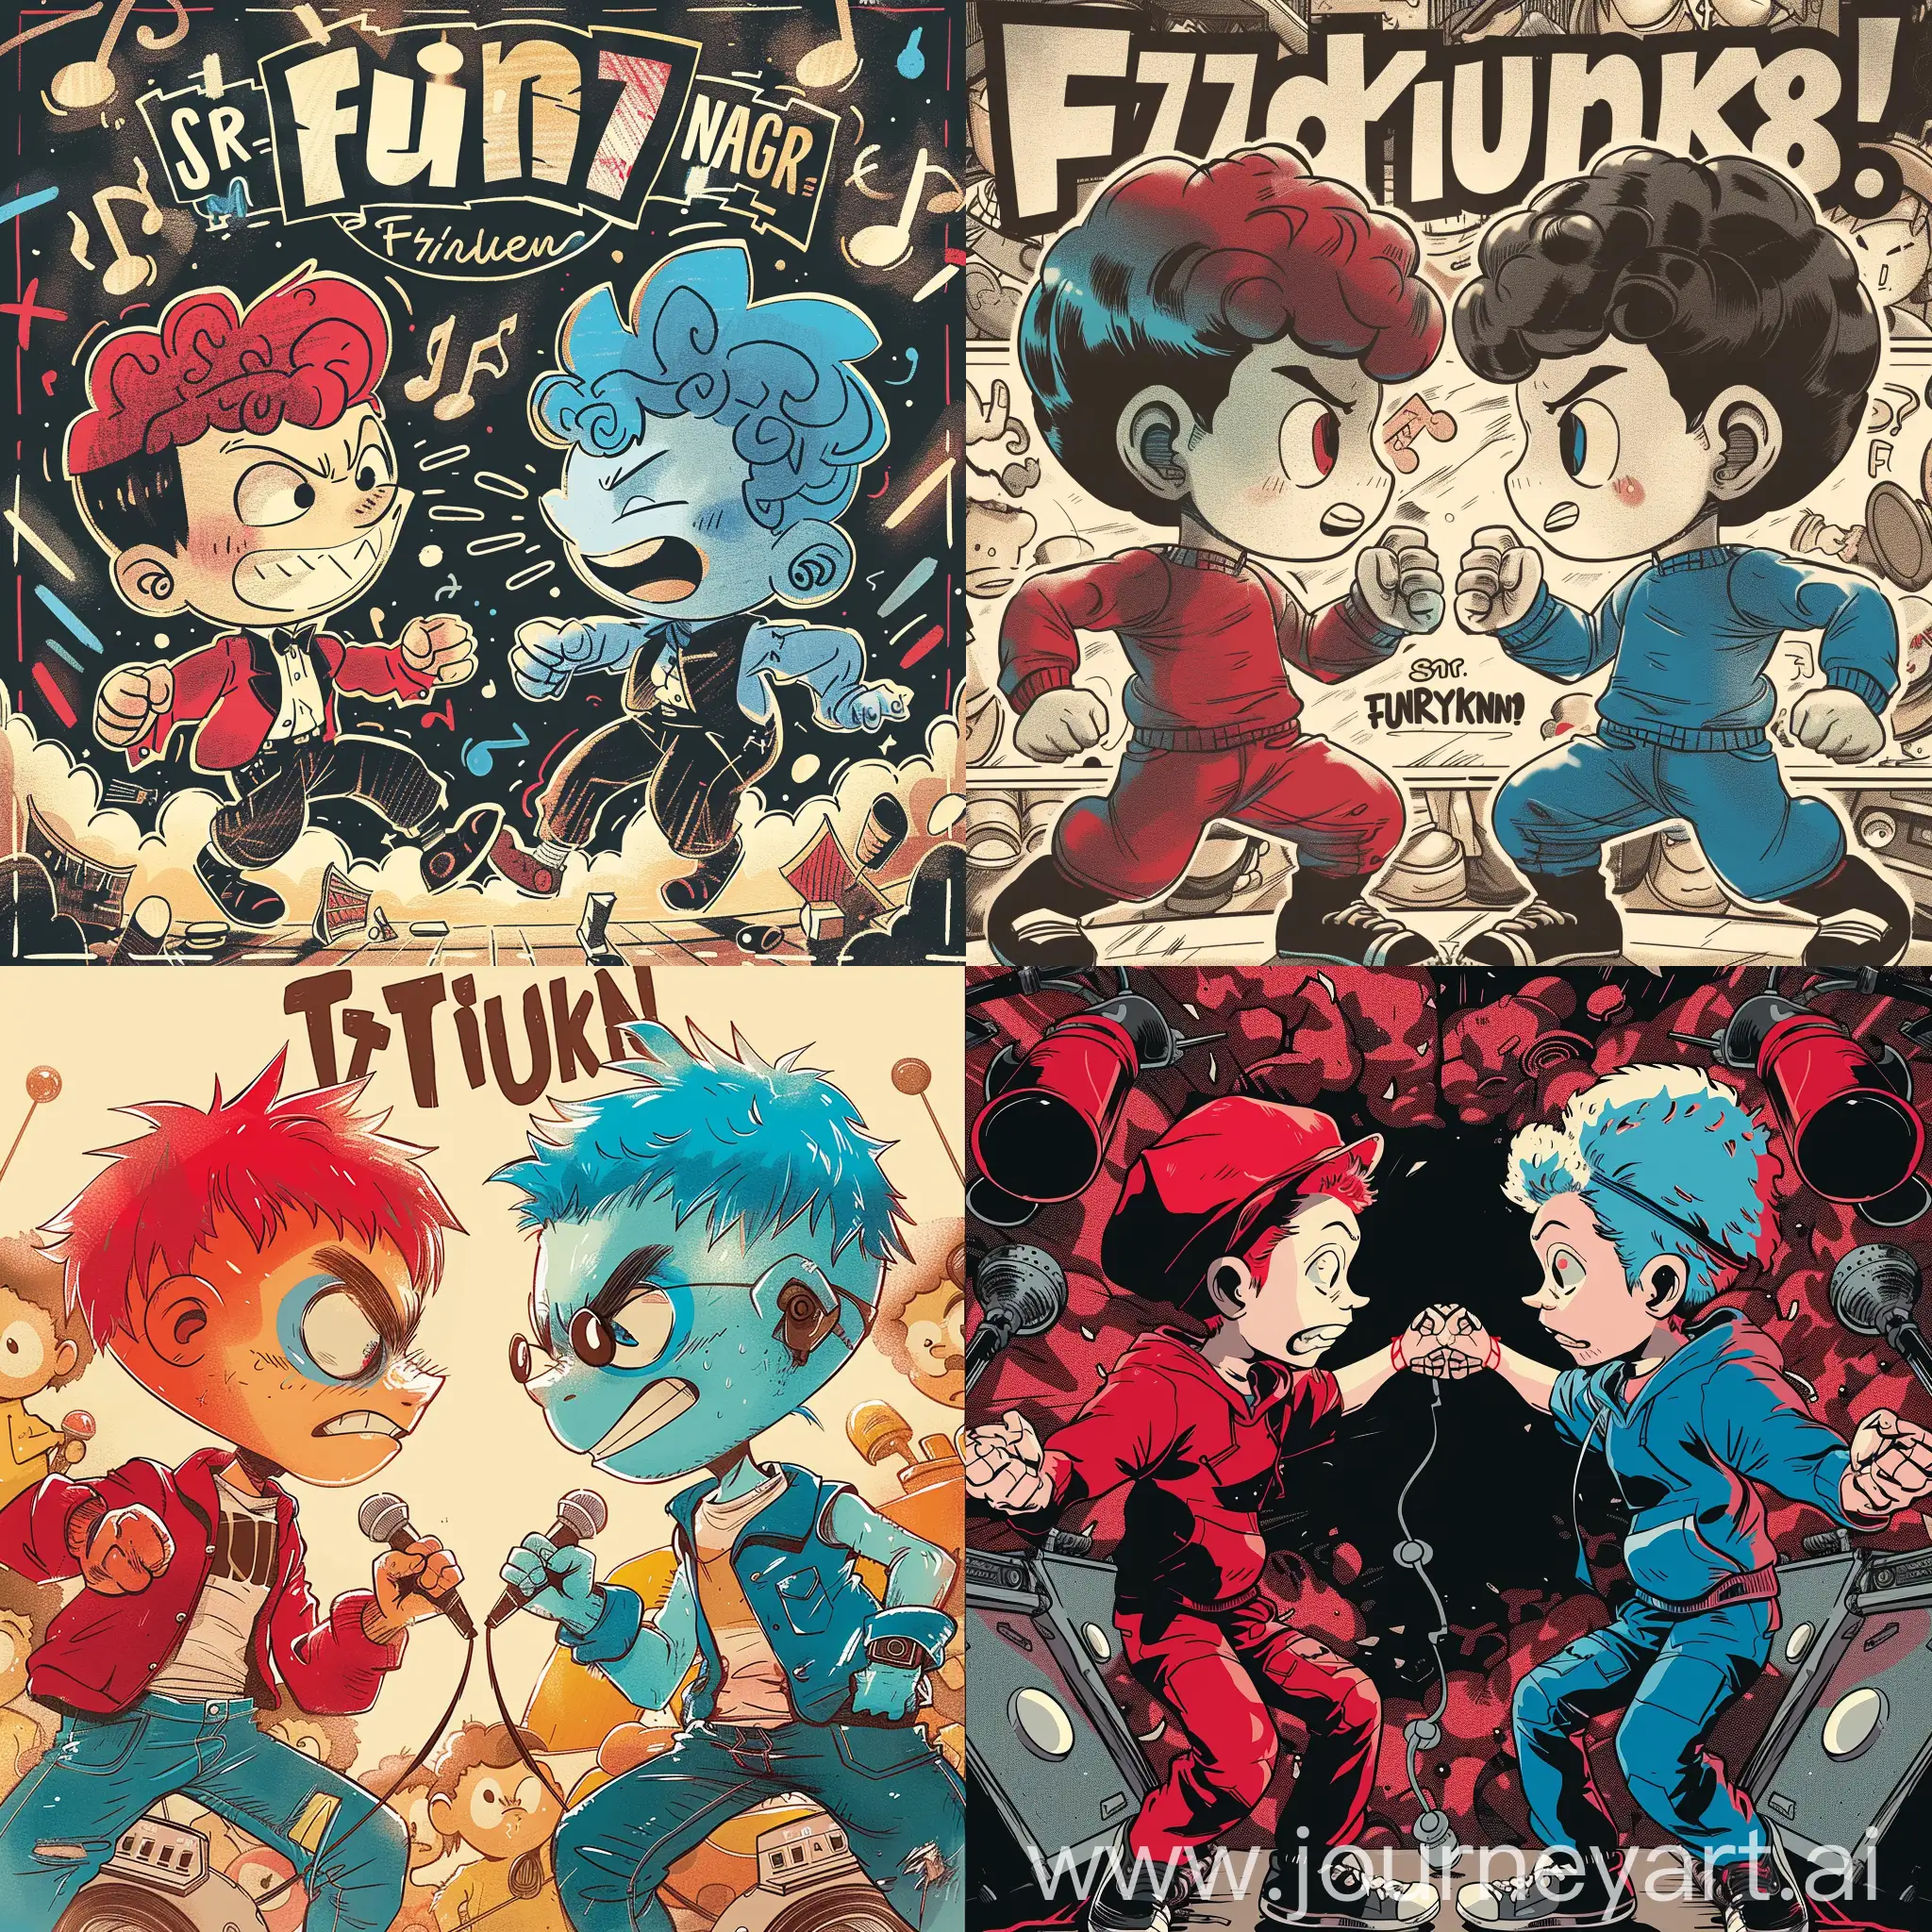 the cover for the track where two boy characters red and blue compete in a friendship duet, which arose due to a quarrel between the characters with the atmosphere of Friday night funkin, also on the cover is a drawing like Sr. pelo